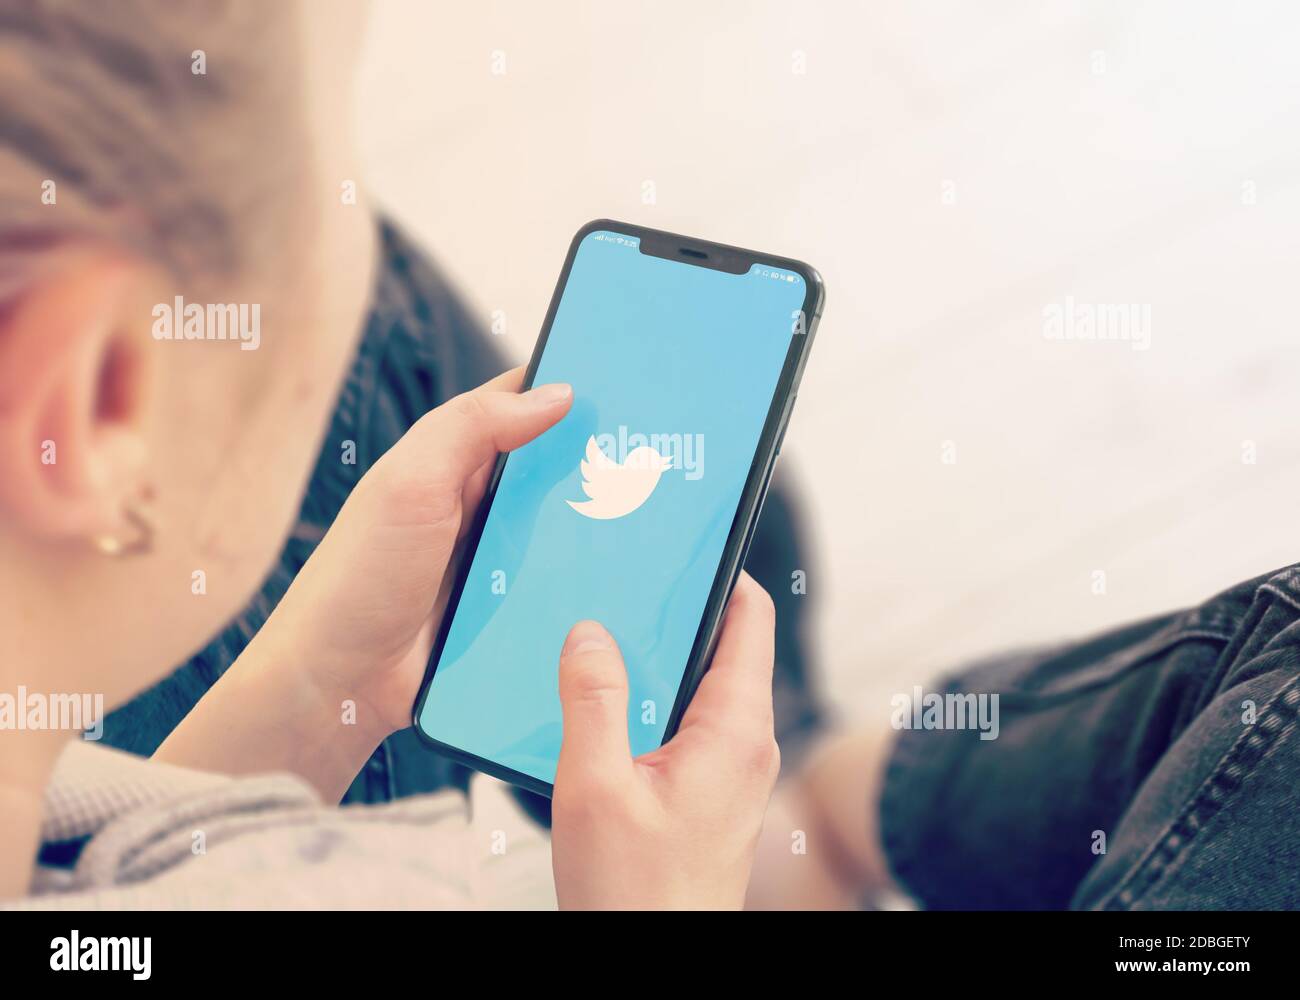 KYIV, UKRAINE-JANUARY, 2020: Twitter on Smart Phone Screen. Young Girl Pointing or Texting Cellphone During a Pandemic Self-Isolation and Coronavirus Stock Photo